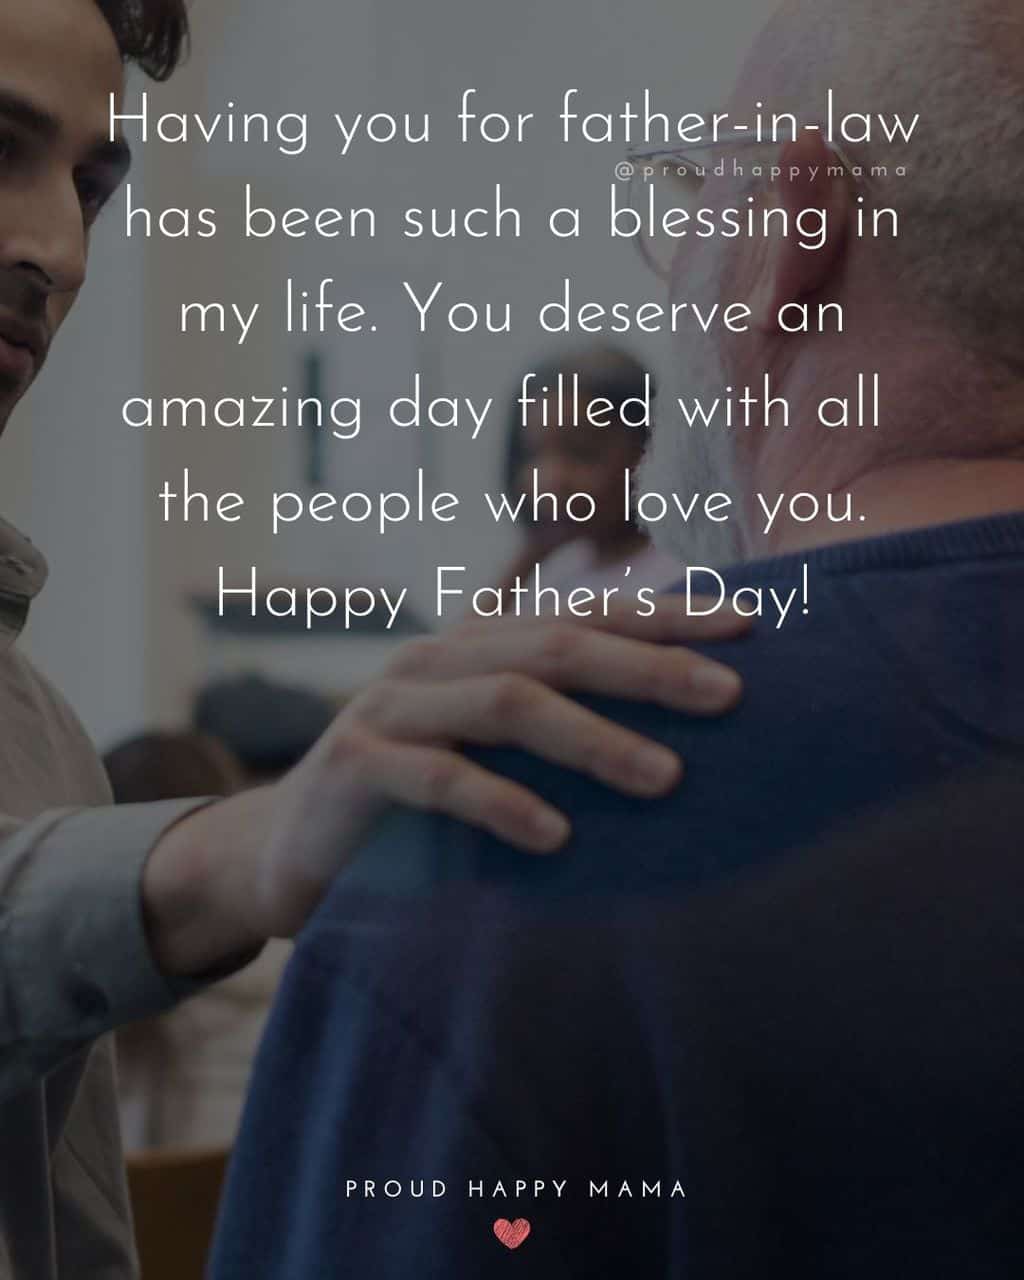 Happy Fathers Day Quotes For Father In Law - Having you for father in law has been such a blessing in my life. You deserve an